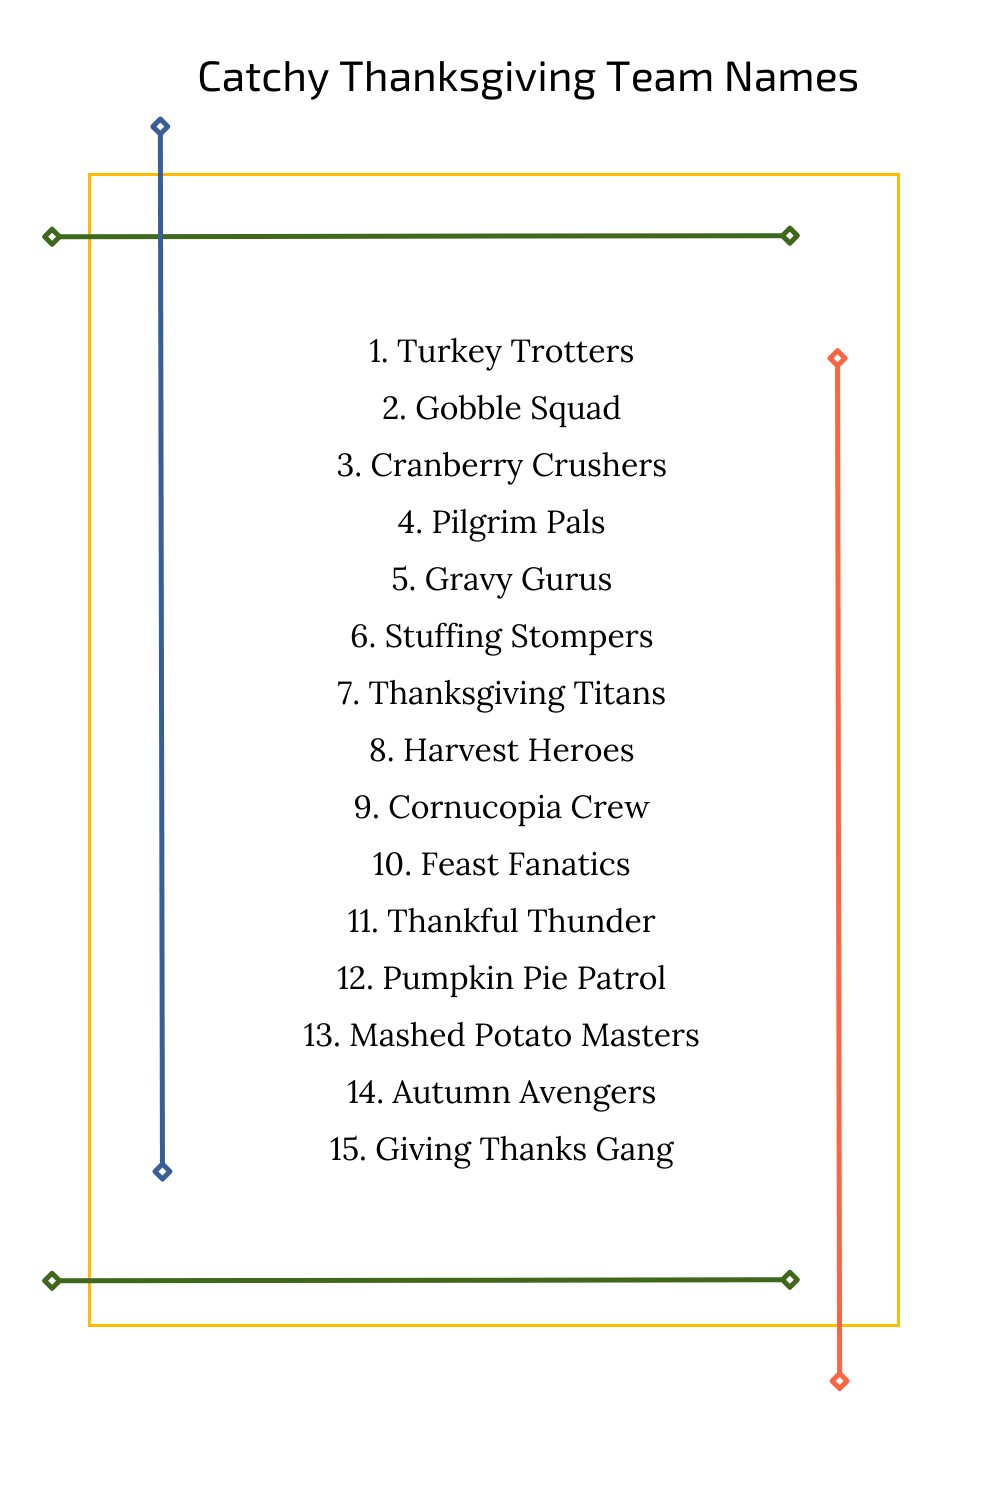 Catchy Thanksgiving Team Names